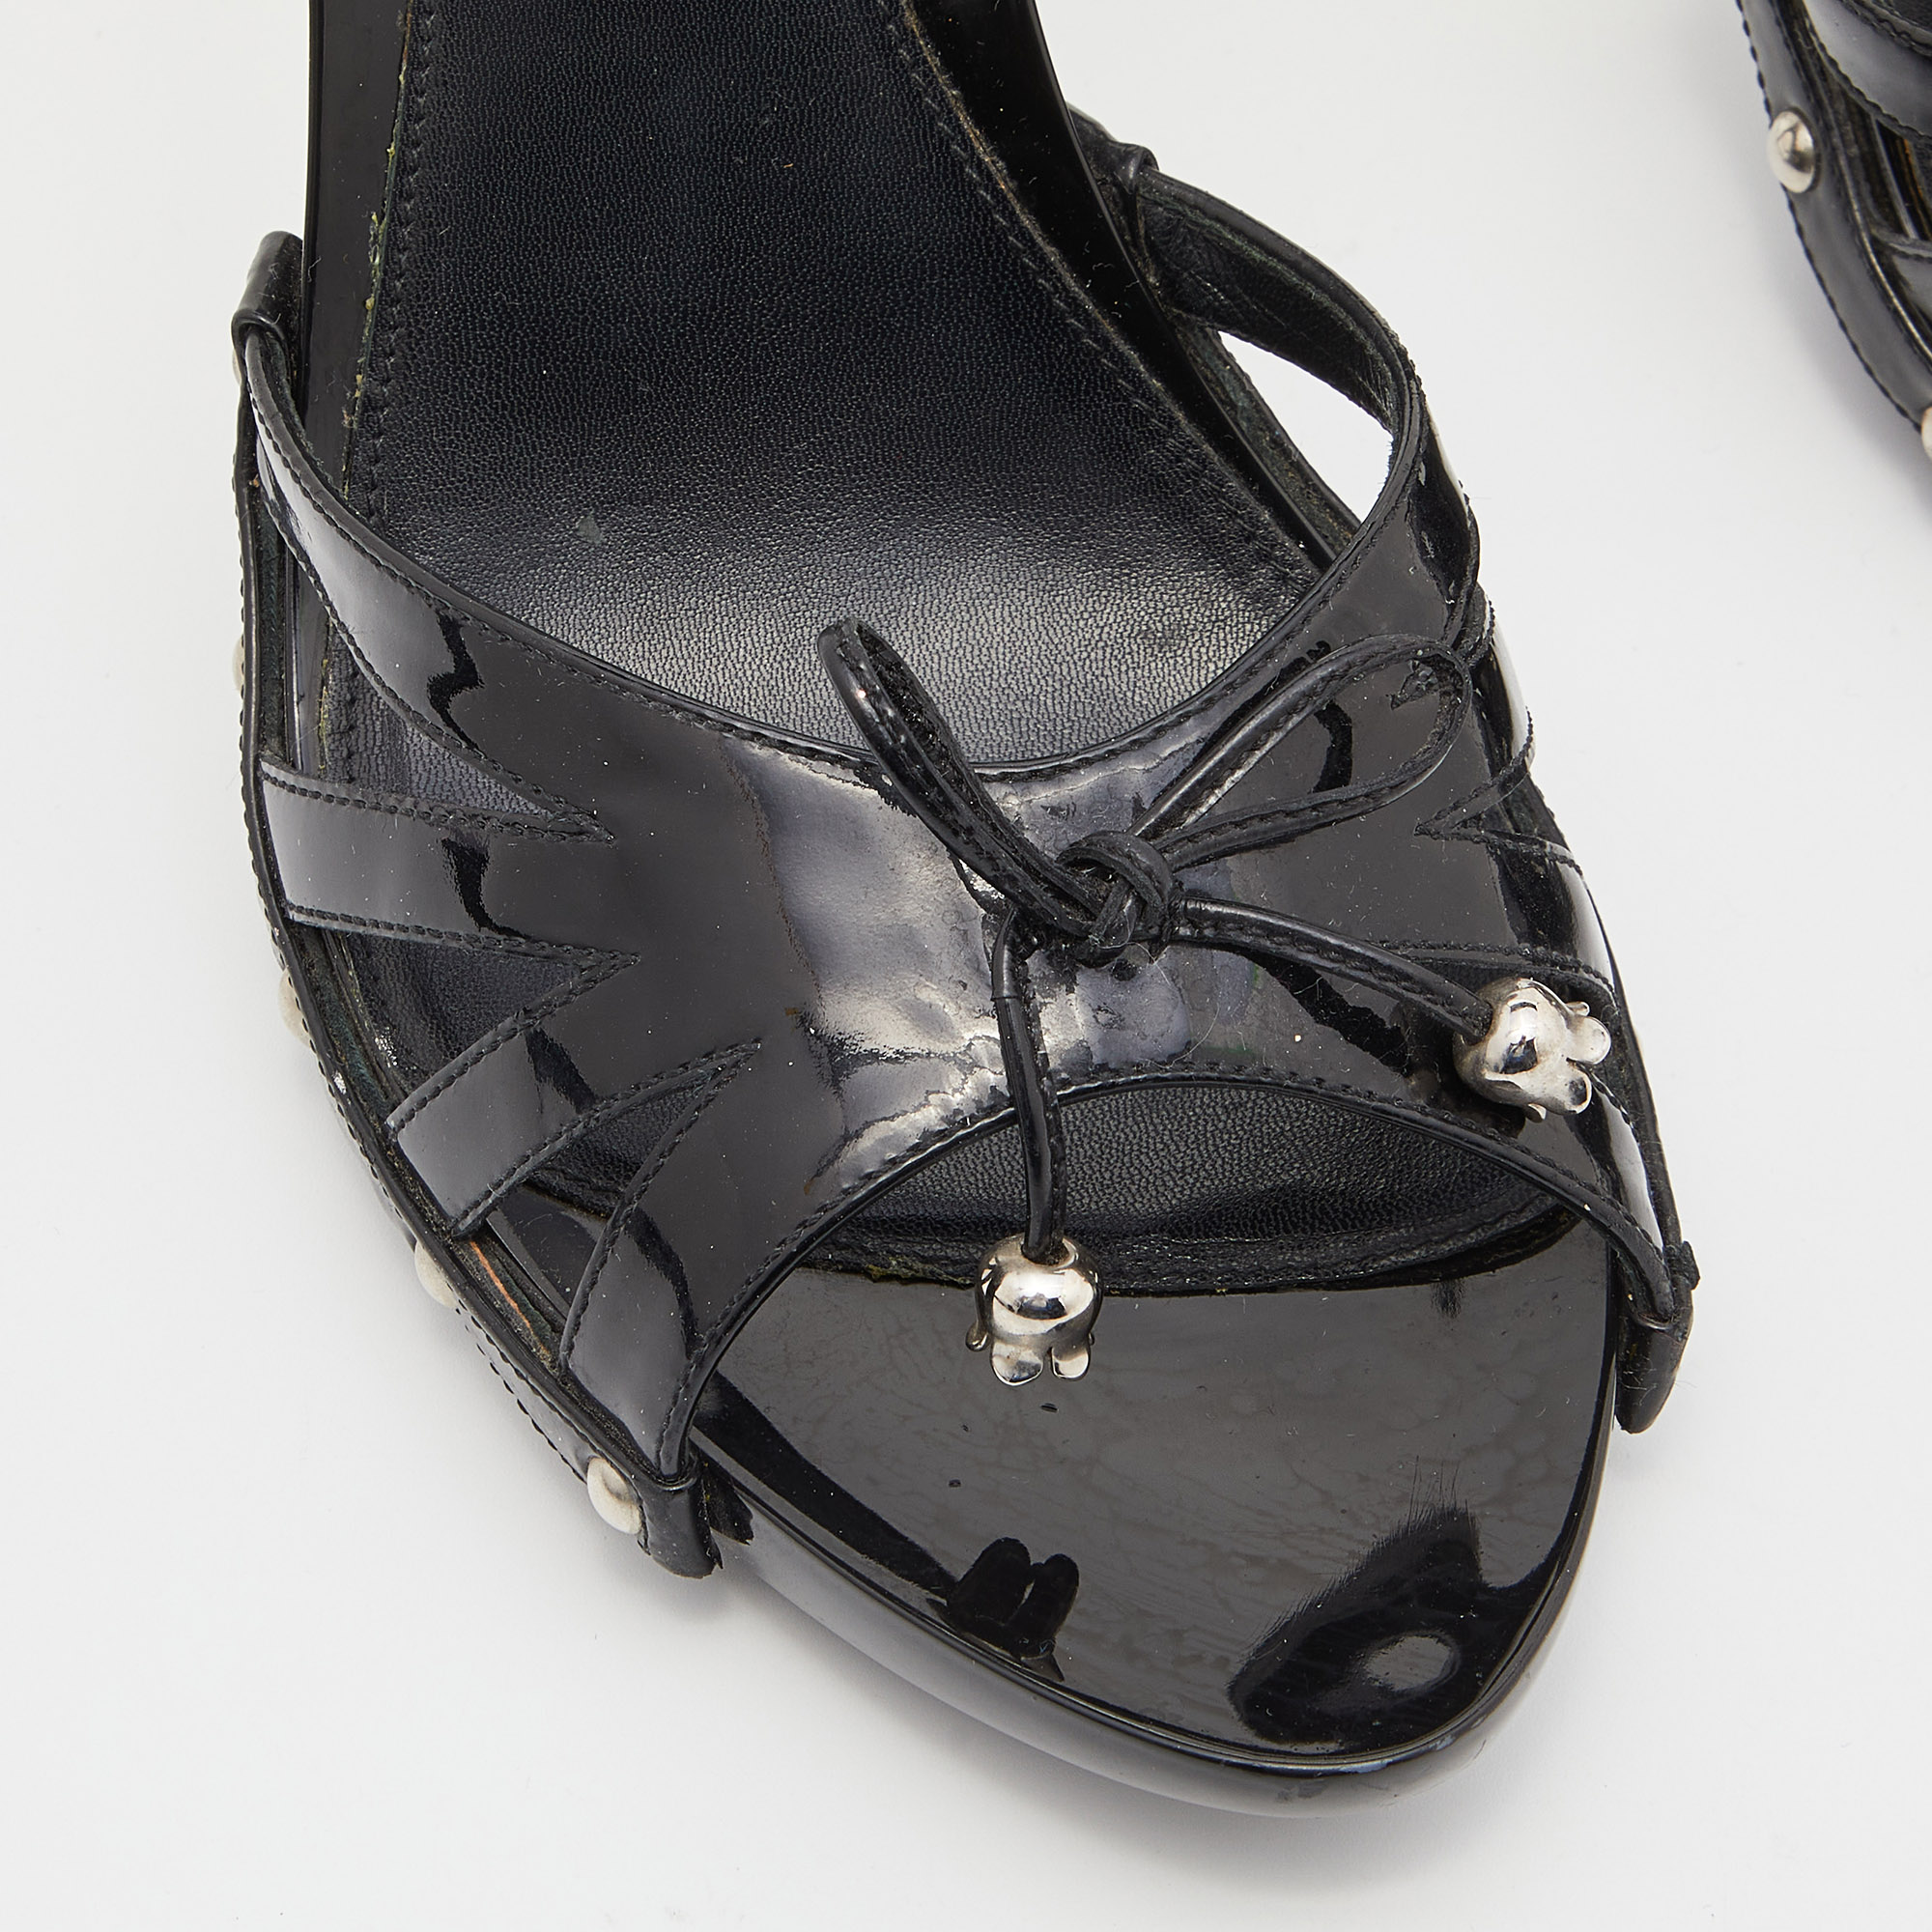 Dior Black Patent Leather Bow Strappy Slide Sandals Size 42